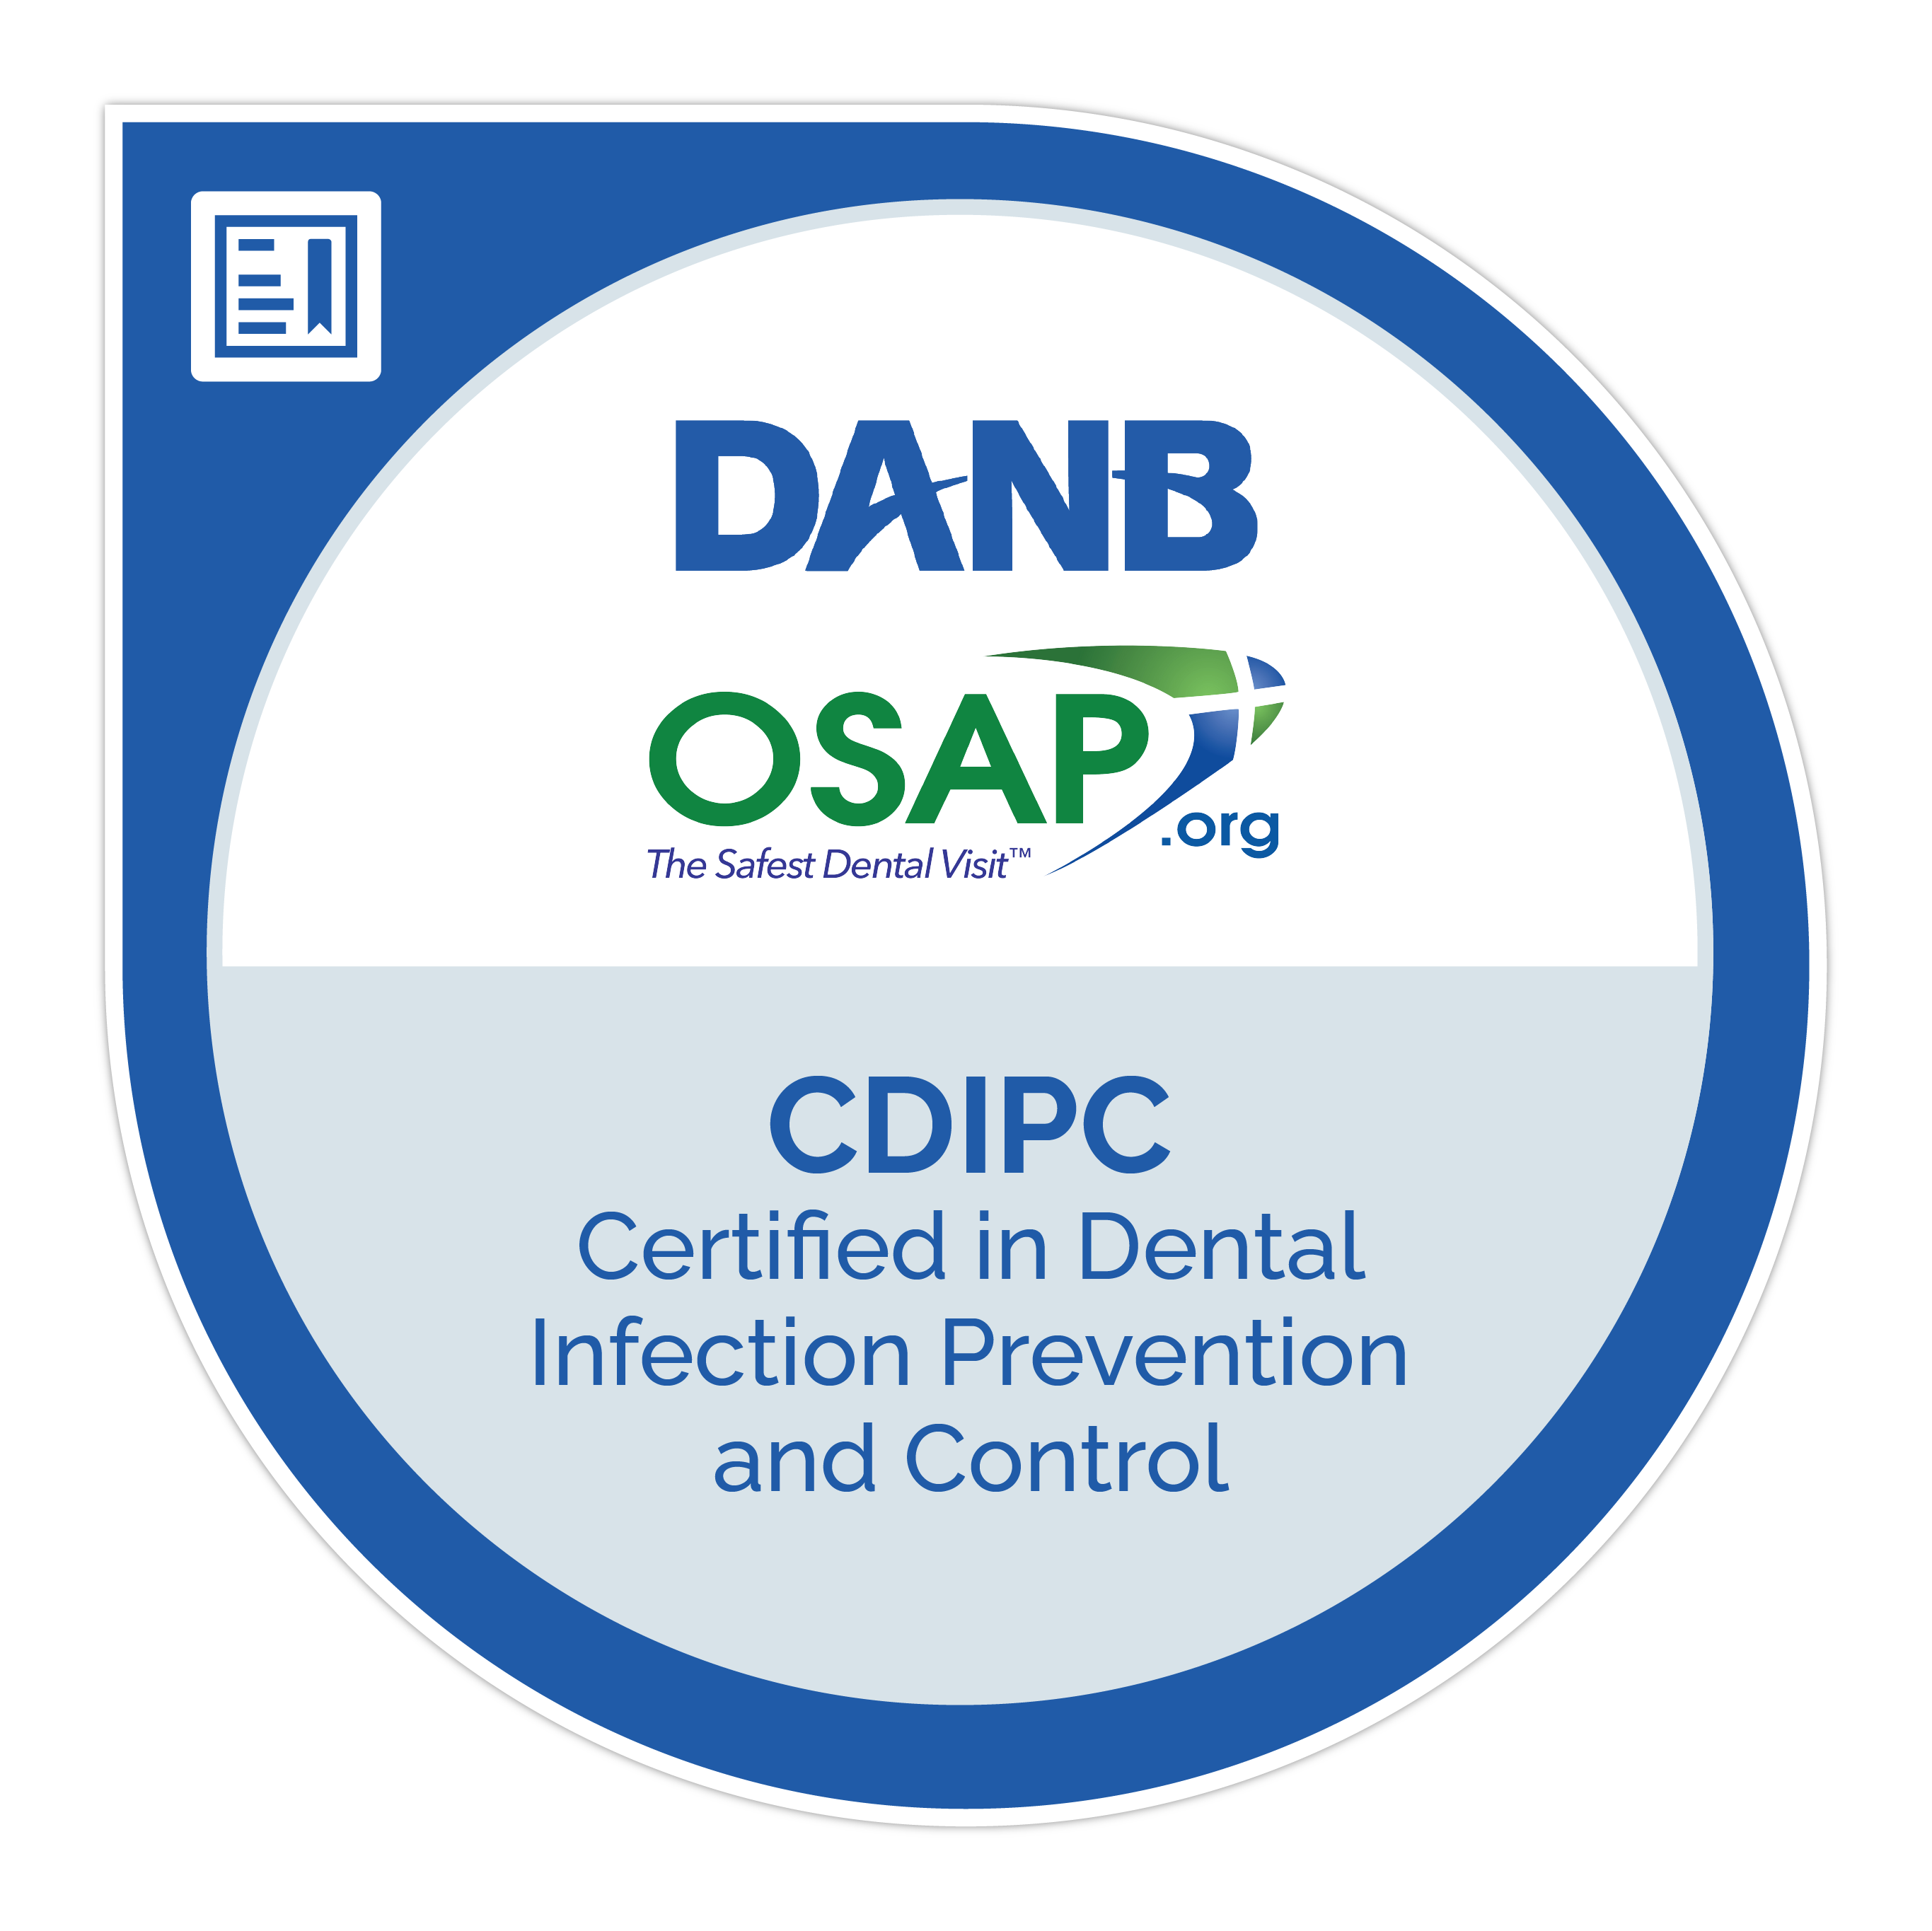 CDIPC - Certified in Dental Infection Prevention and Control